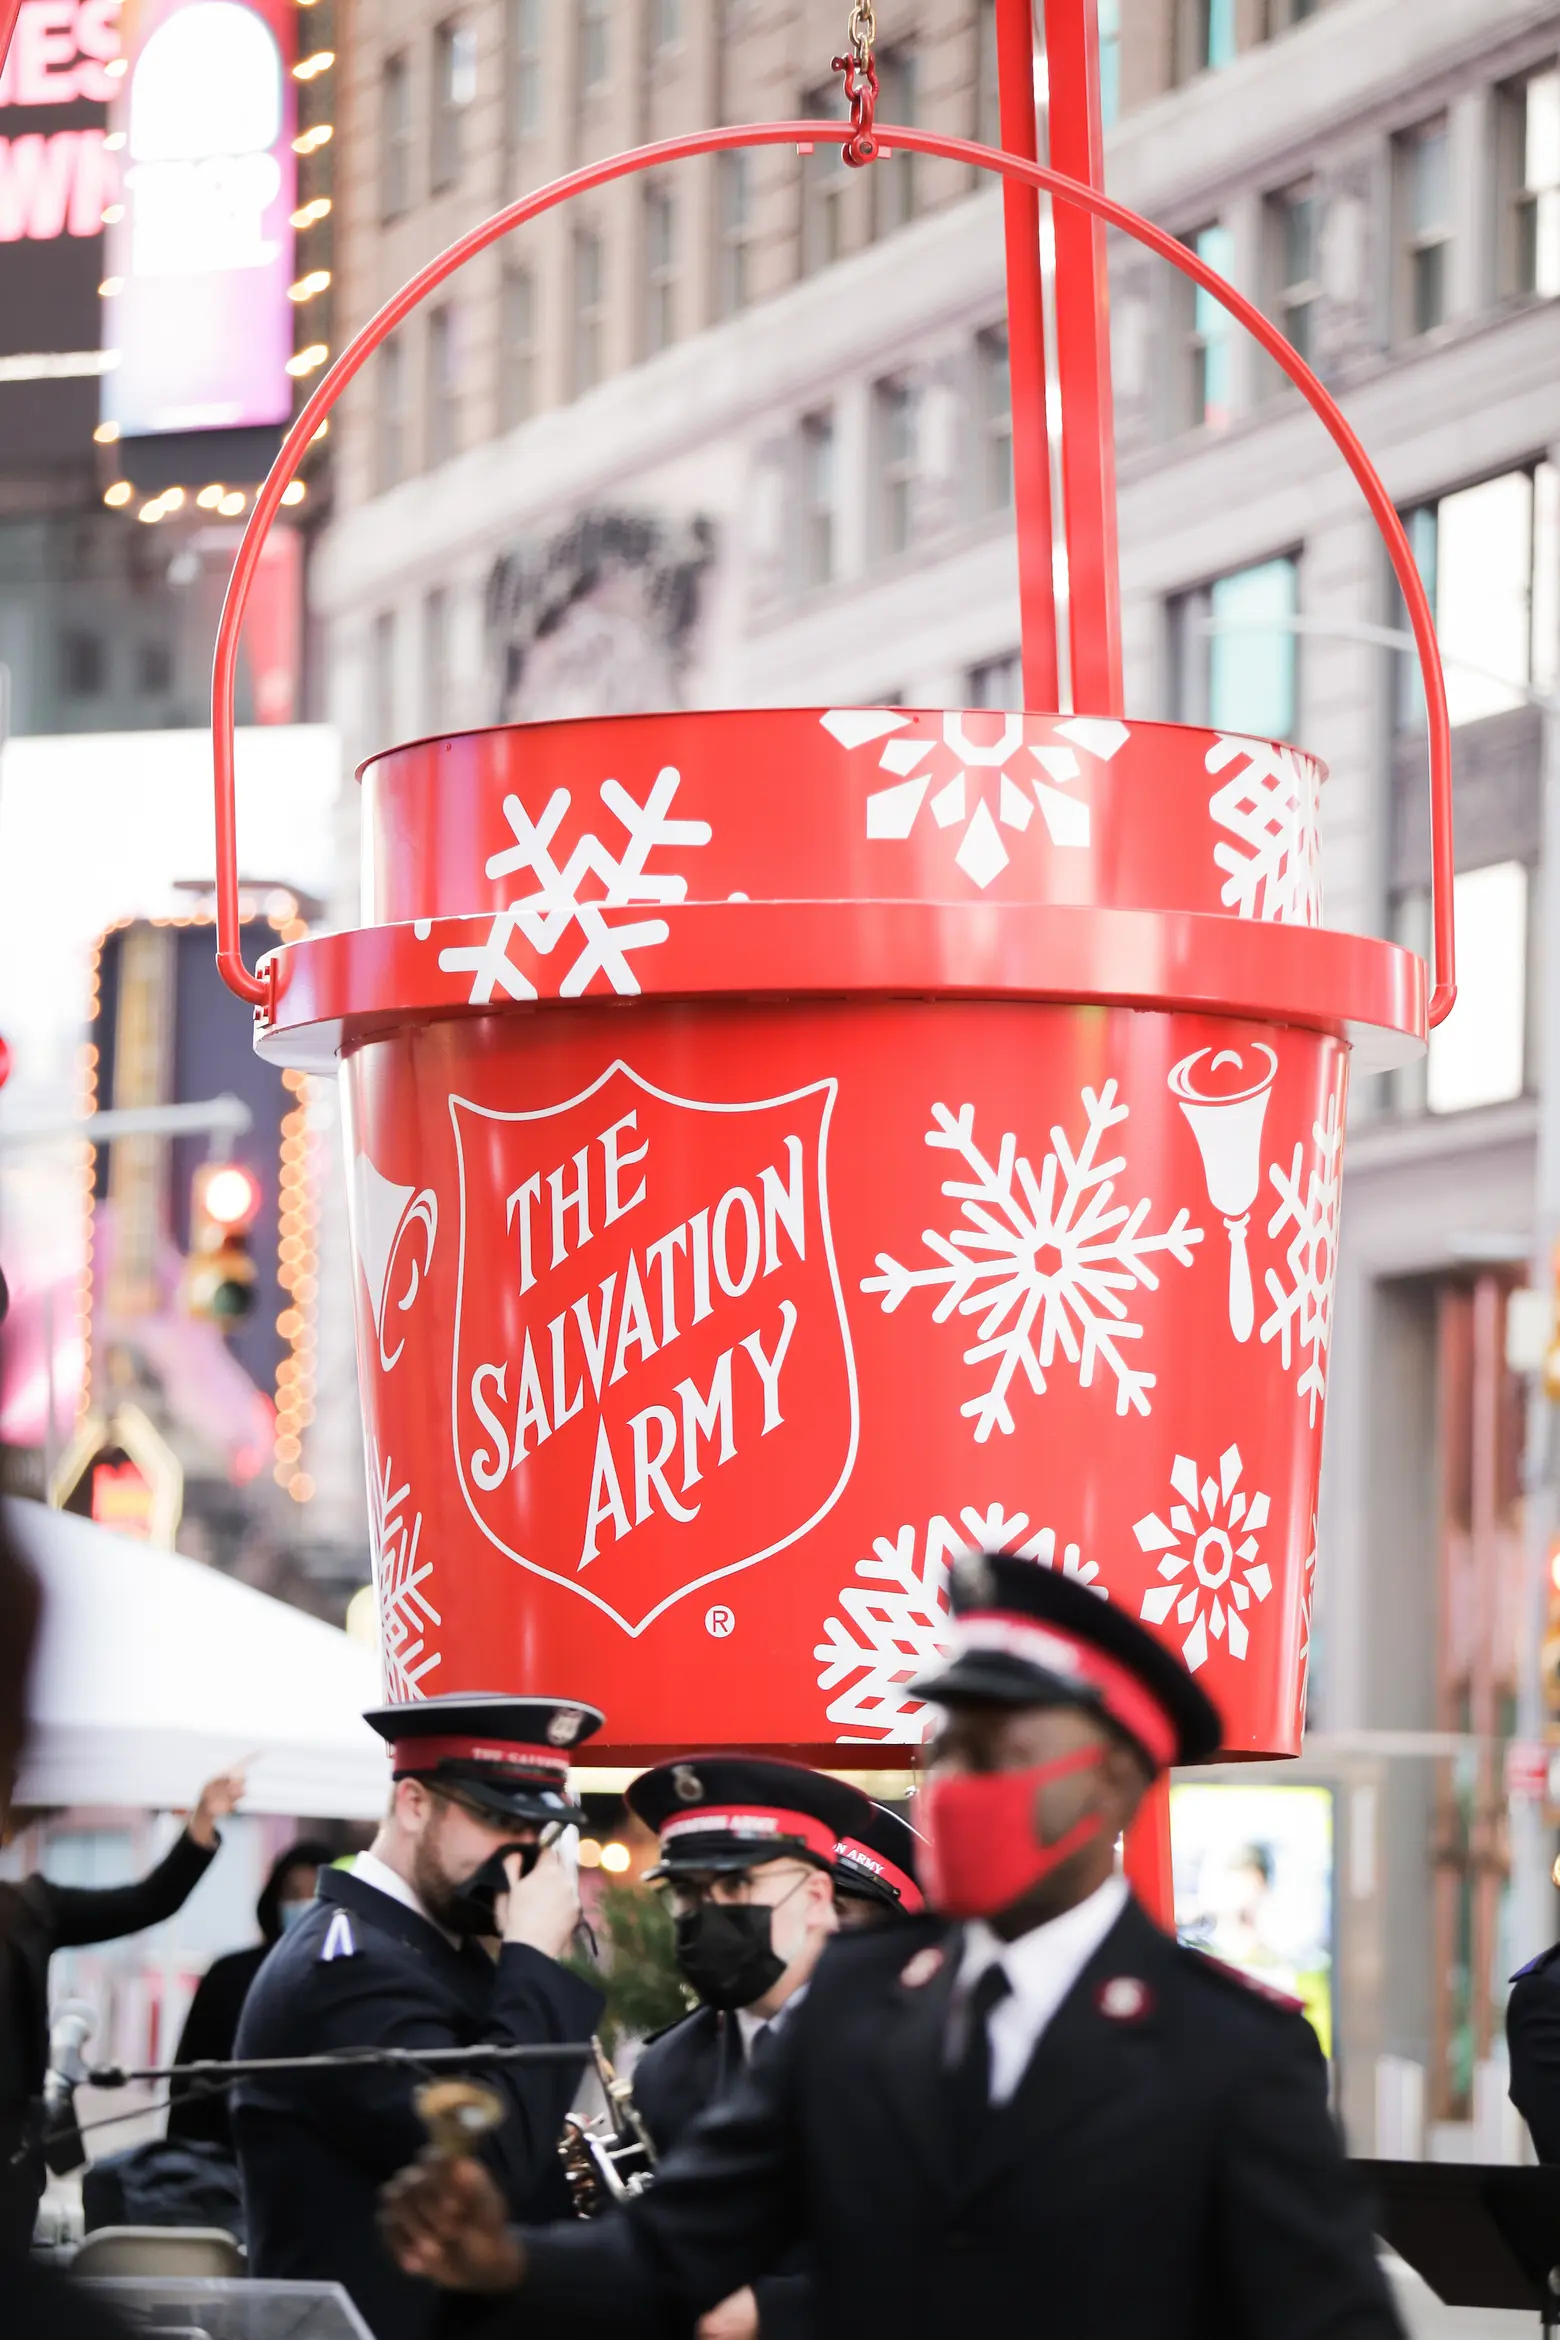 https://thumbs.6sqft.com/wp-content/uploads/2020/12/01133841/giant-red-kettle-salvation-army-2.jpg?w=1560&format=webp